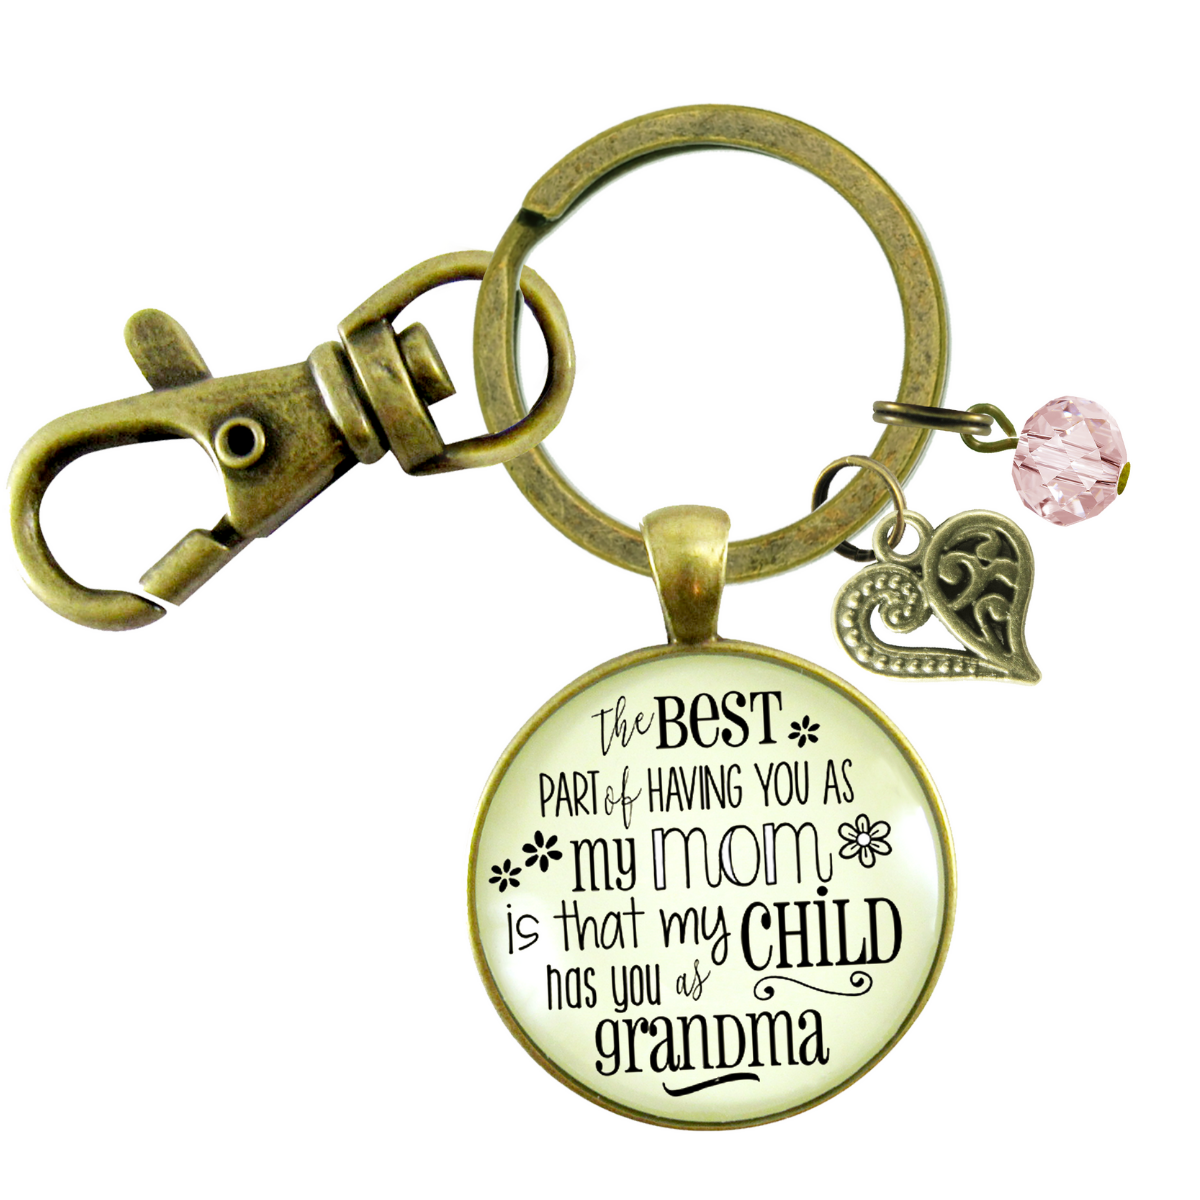 Grandmother Keychain Best Part You As Mom My Child Has Grandma Jewelry Gift From Daughter - Gutsy Goodness Handmade Jewelry;Grandmother Keychain Best Part You As Mom My Child Has Grandma Jewelry Gift From Daughter - Gutsy Goodness Handmade Jewelry Gifts